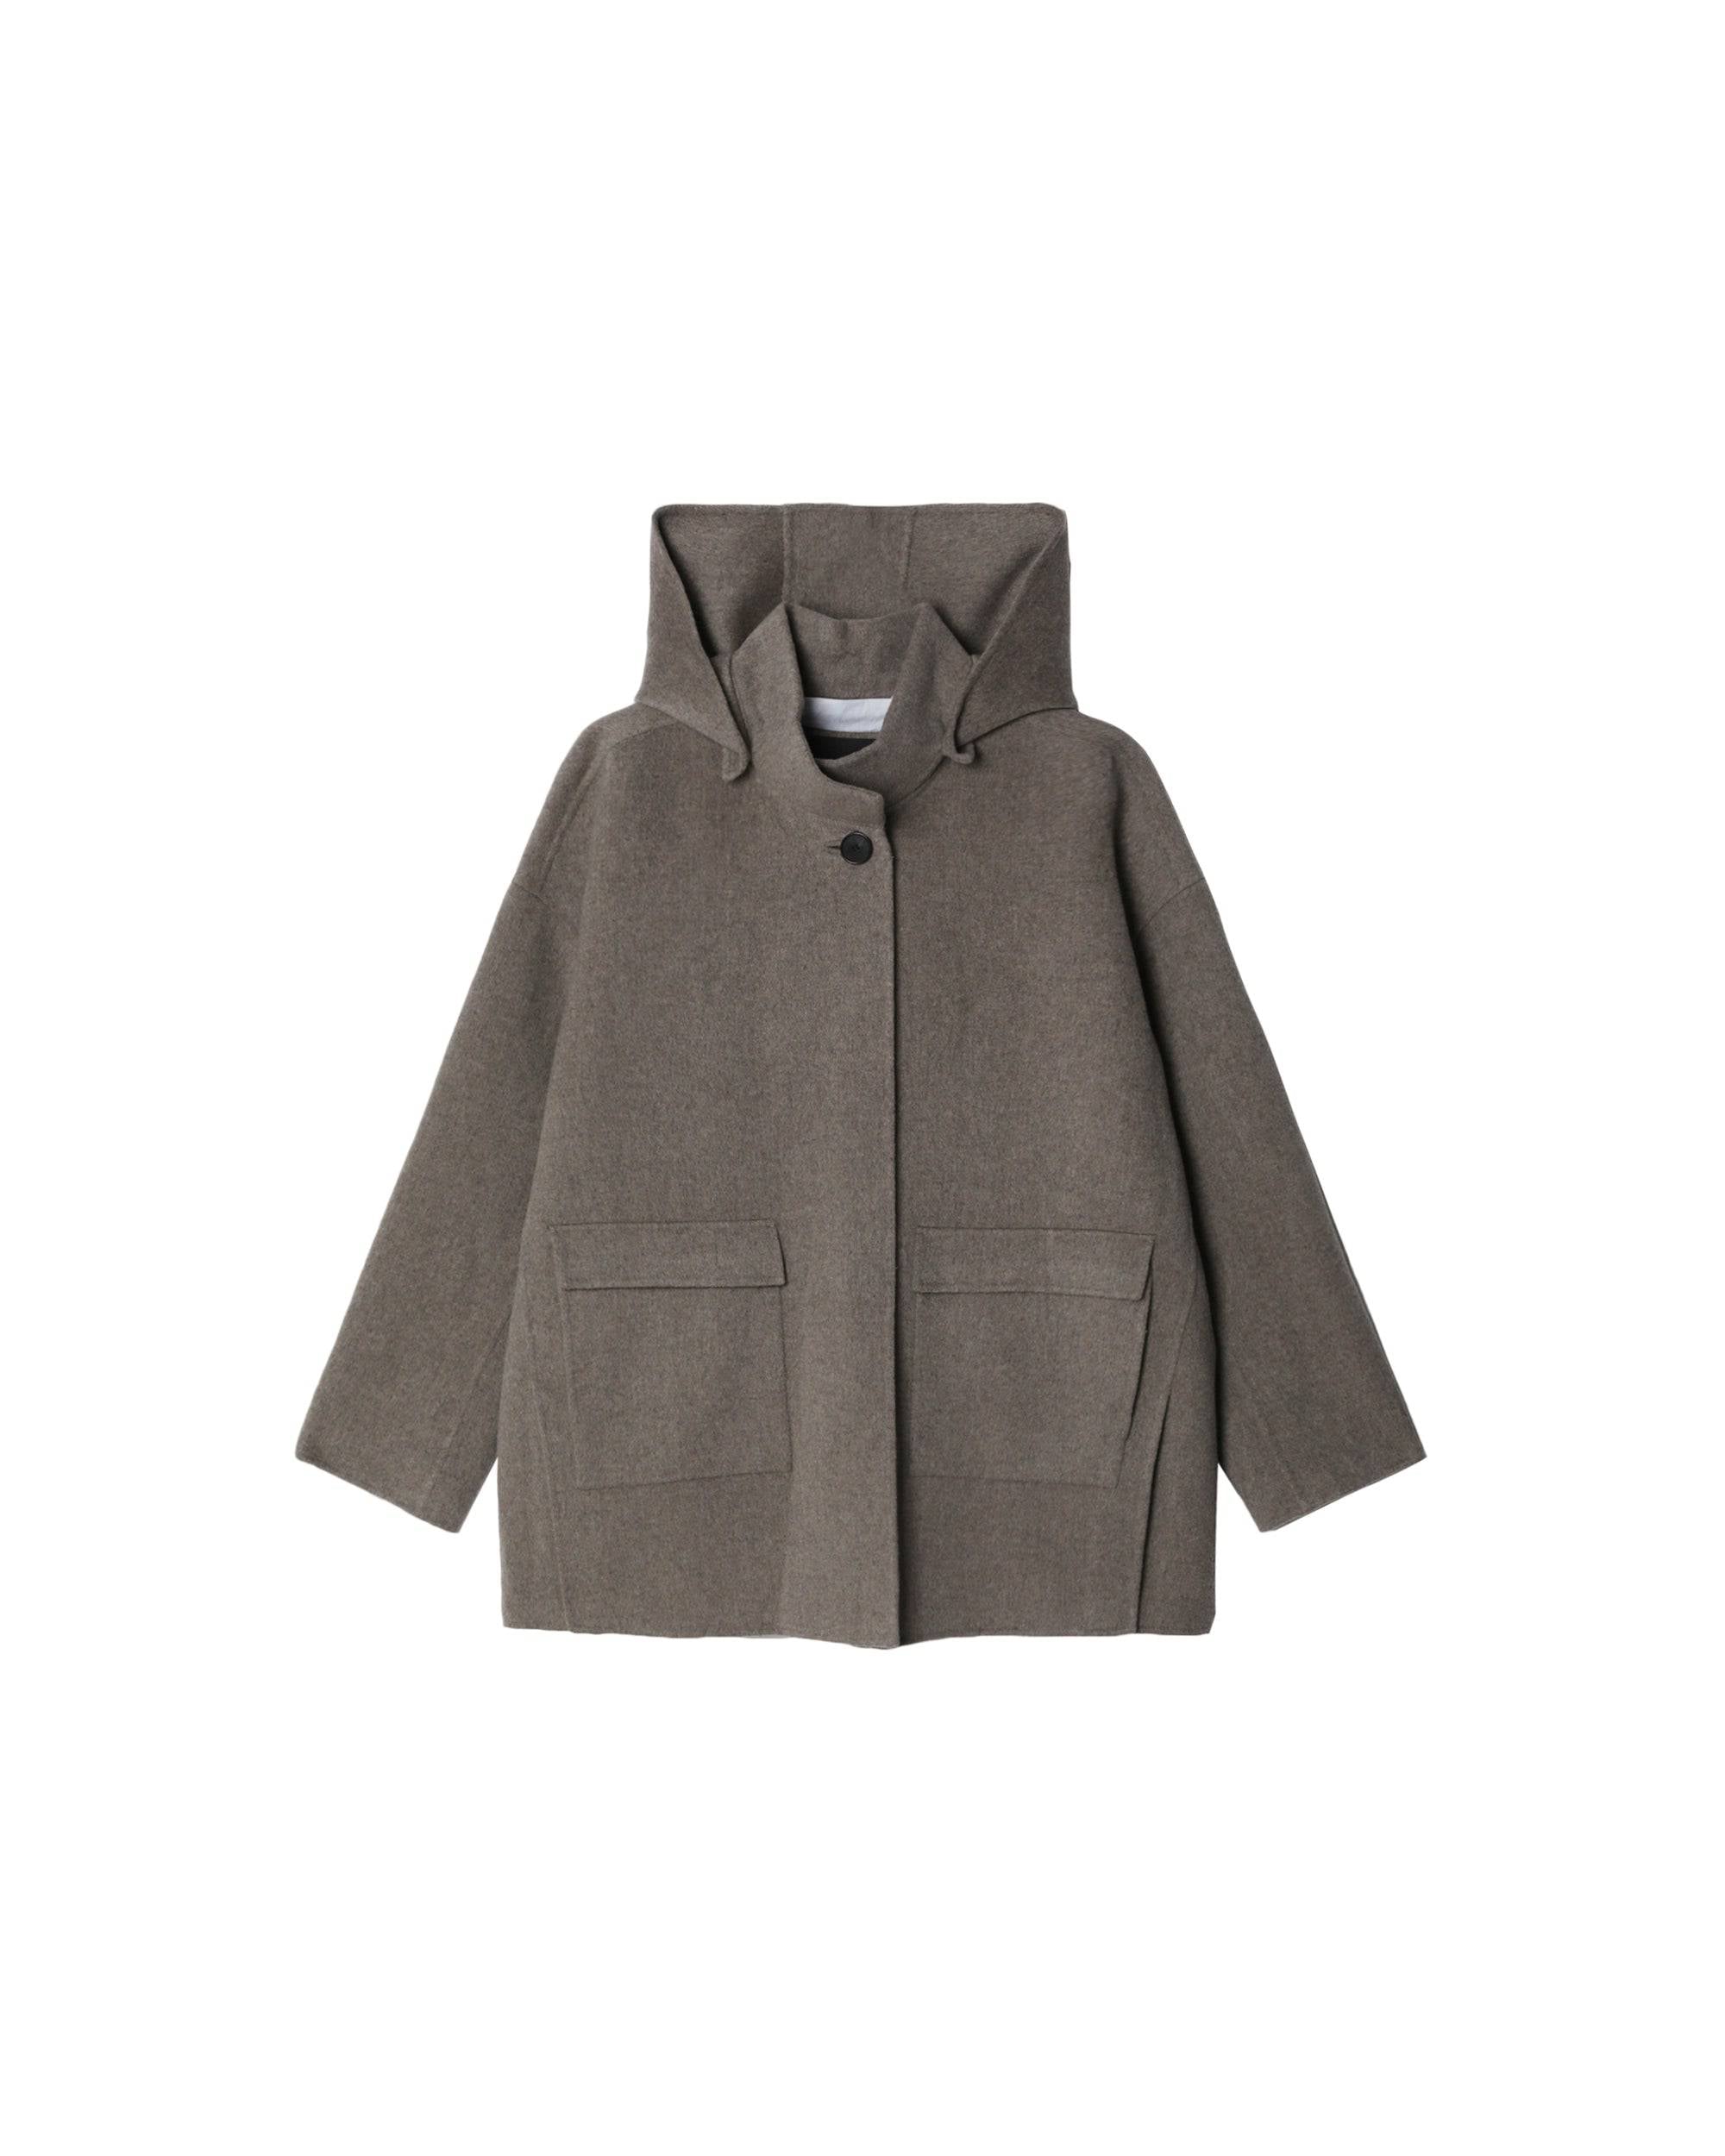 Deluxe Double Cashmere Jacket